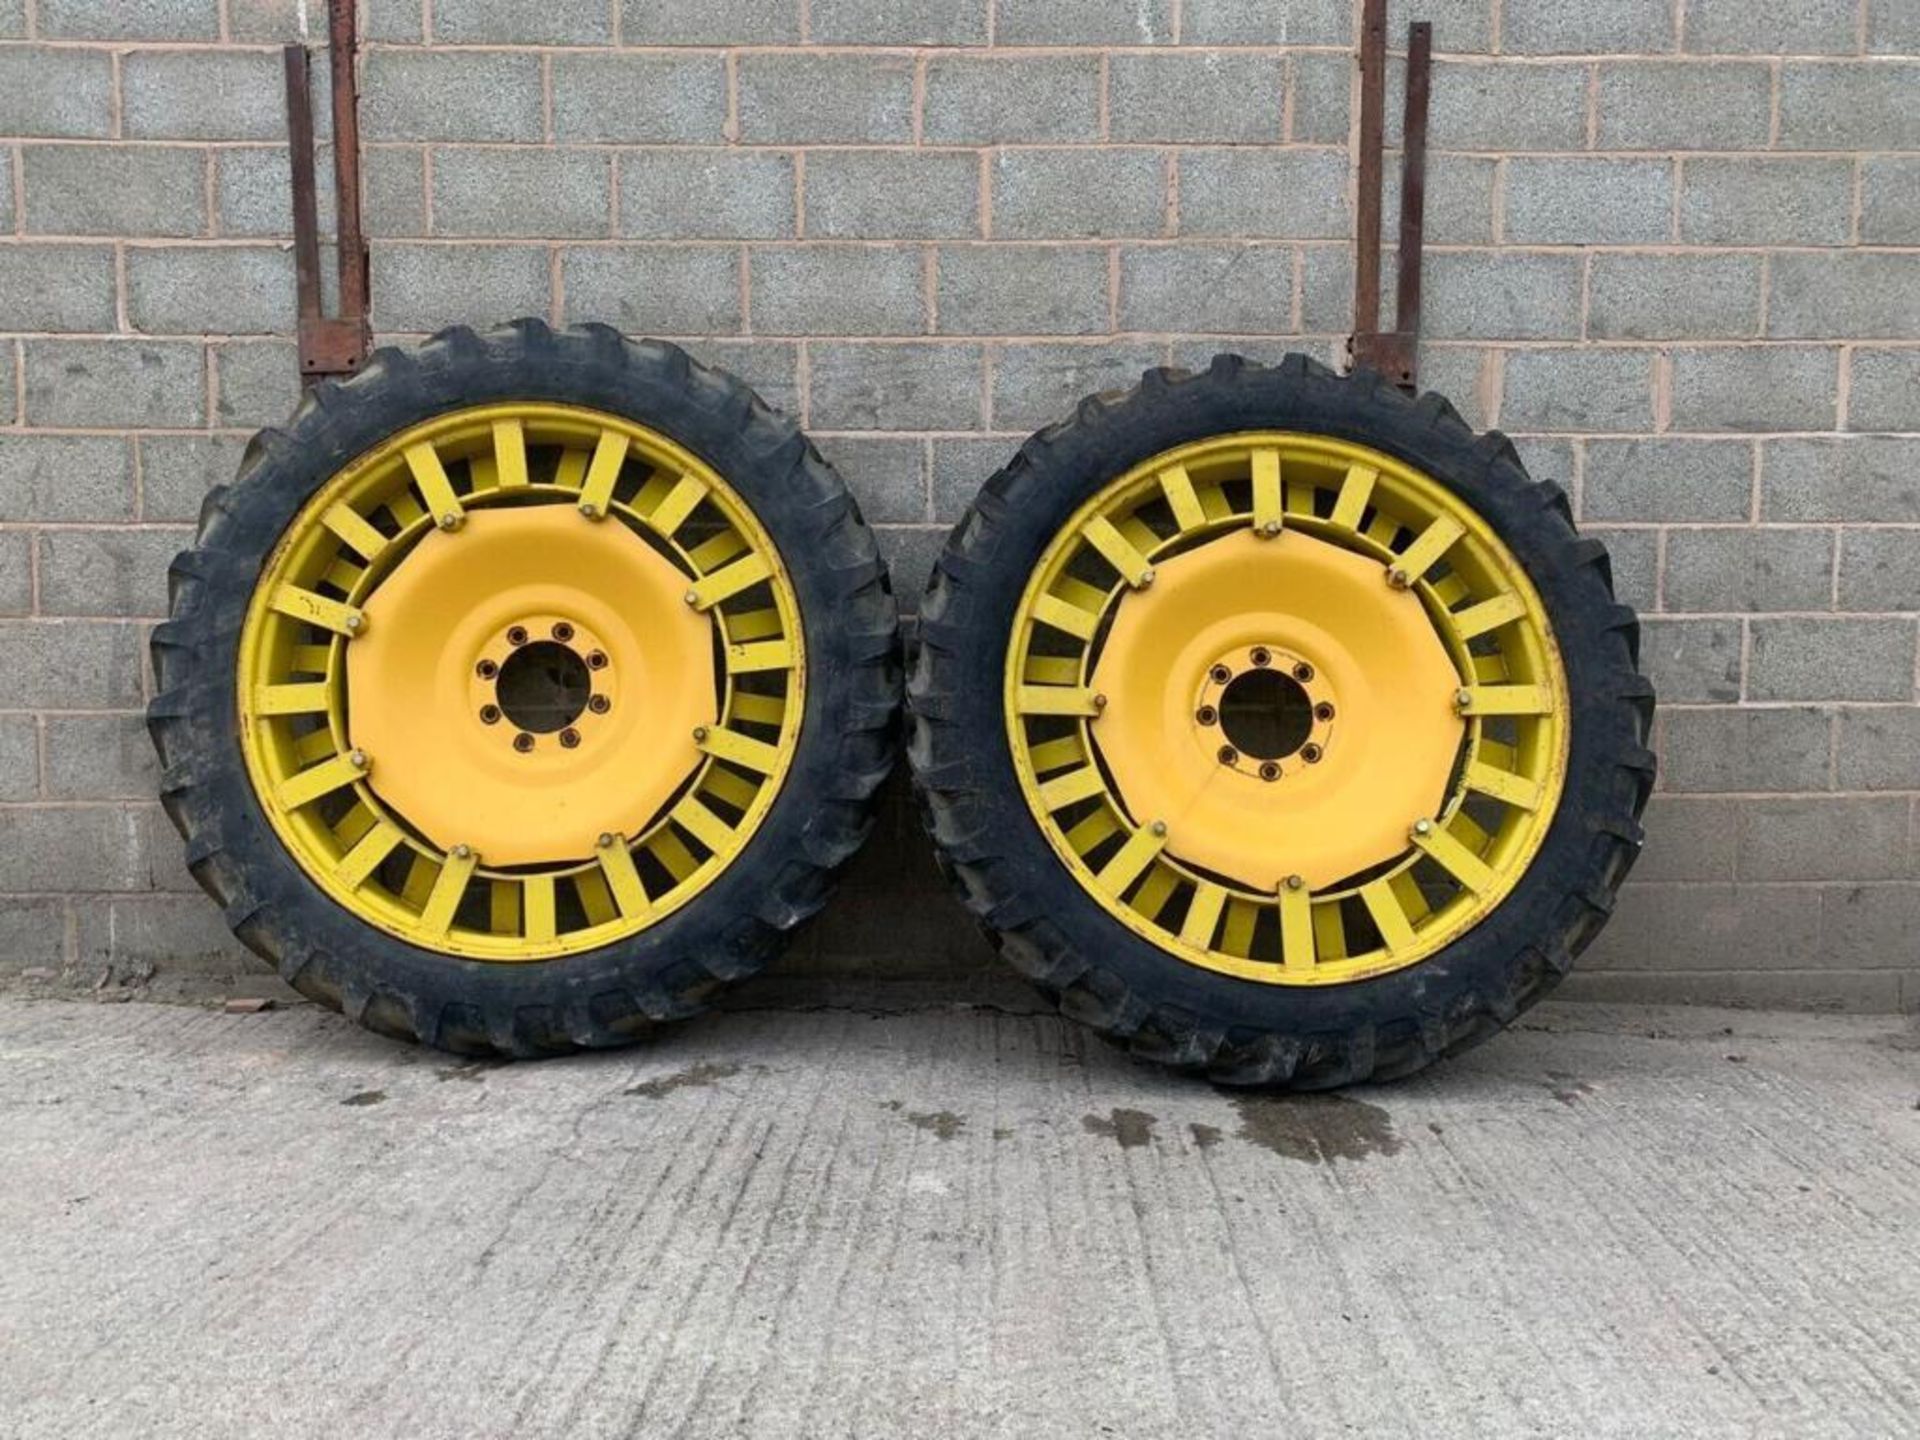 2No. 11.2R48 Alliance A-350 149D/142A8 Tyres on 8 Stud Row Crop Wheels - (Shropshire) - Image 2 of 5